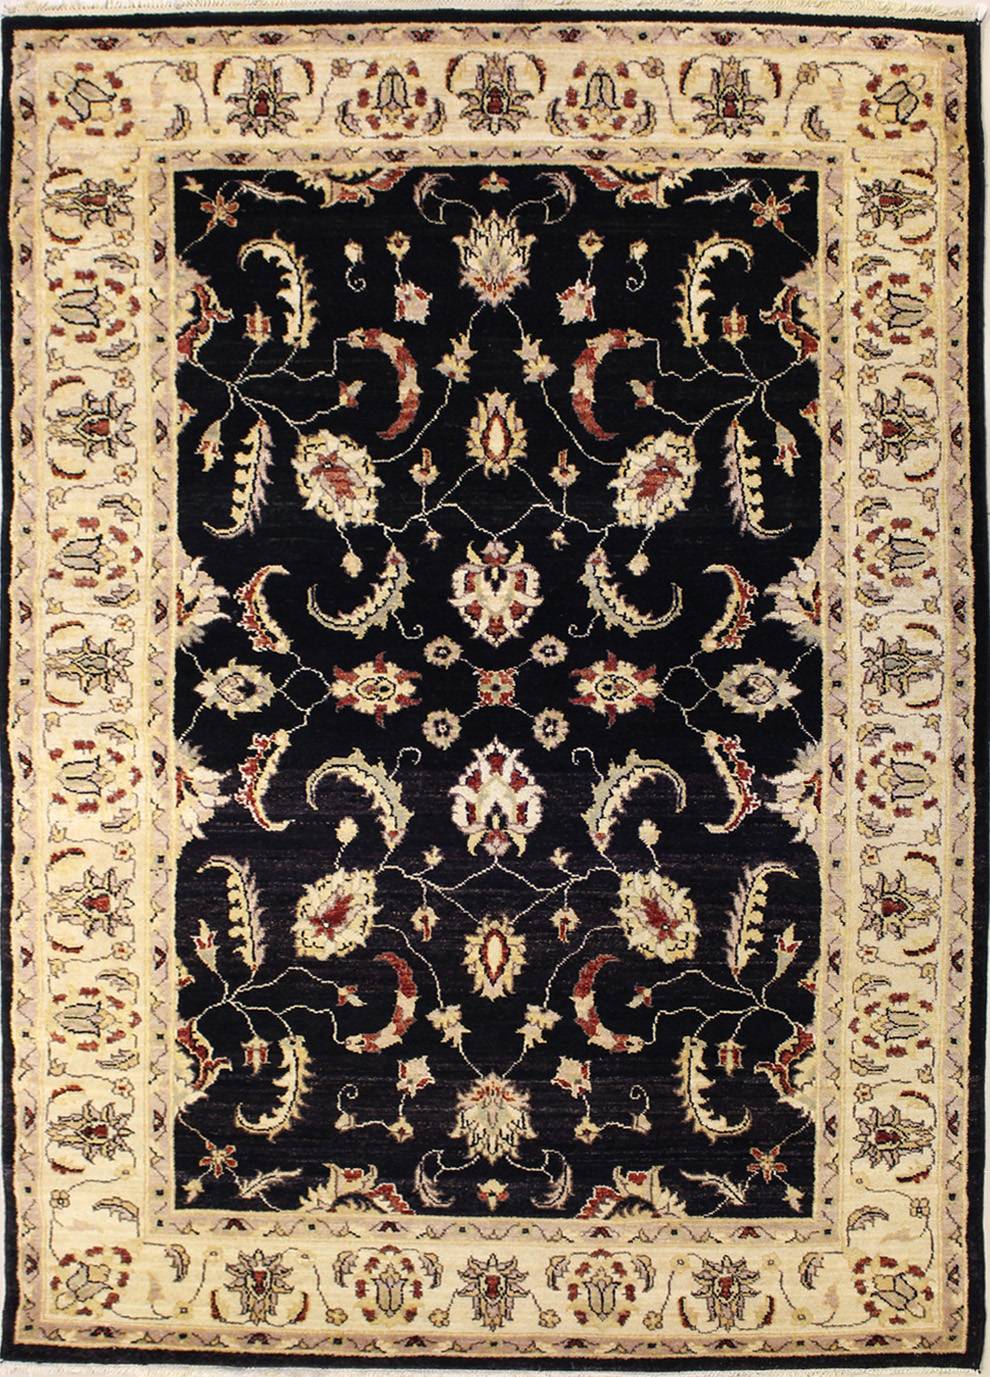 RugsTC 6'1 x 8'7 Chobi Ziegler Area Rug Made Using Vegetable Dyes with Wool Pile a 6x9 Rectangular Double Knot Rug 100% Original Hand-Knotted in Black,Beige,Green Colors 